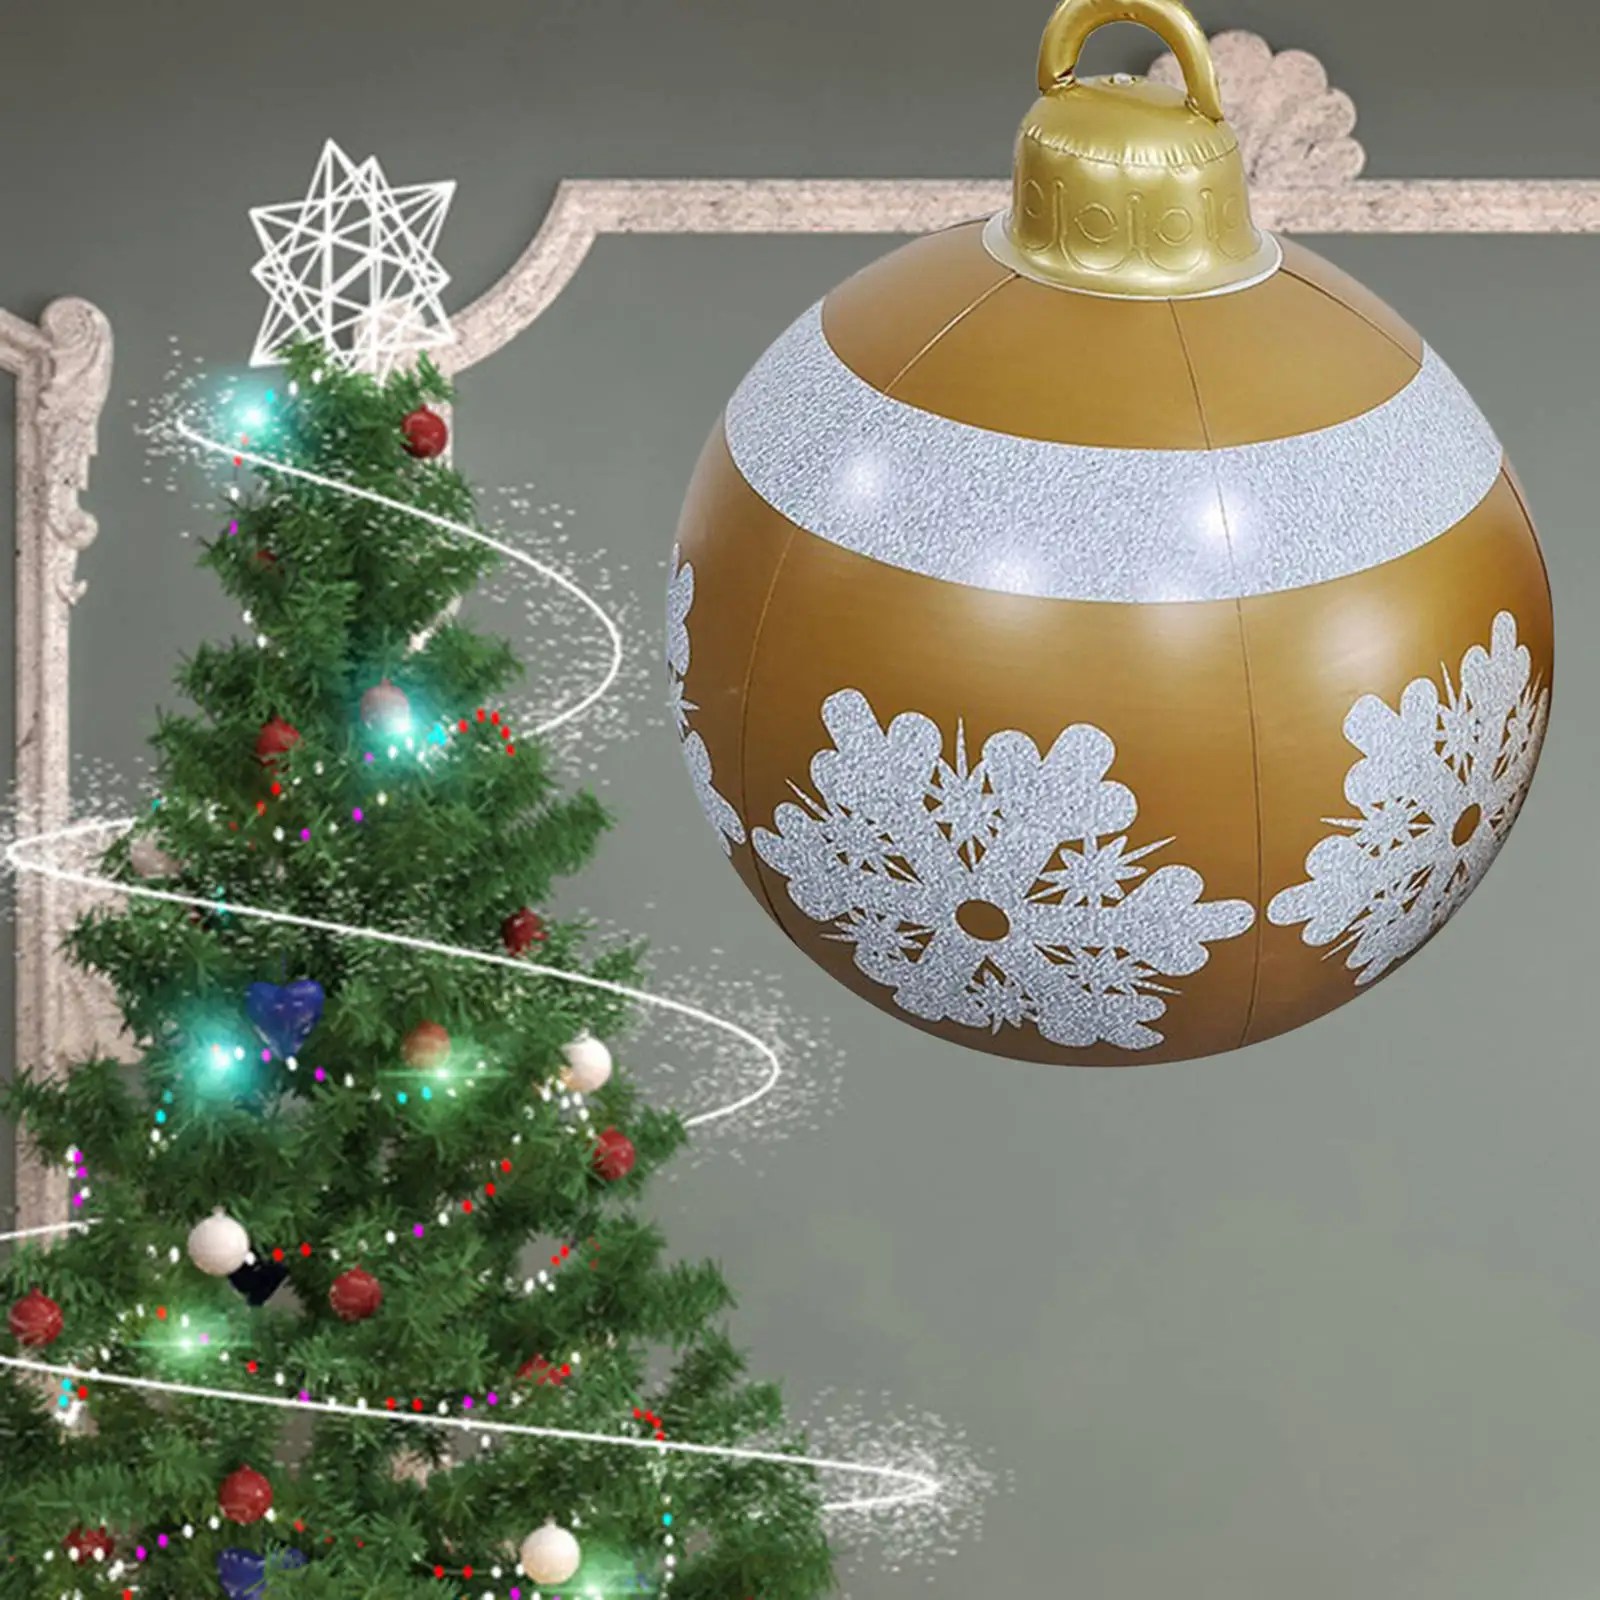 23.6inch Giant Christmas Inflatable Ball Ornament Decorative PVC for Indoor Lawn